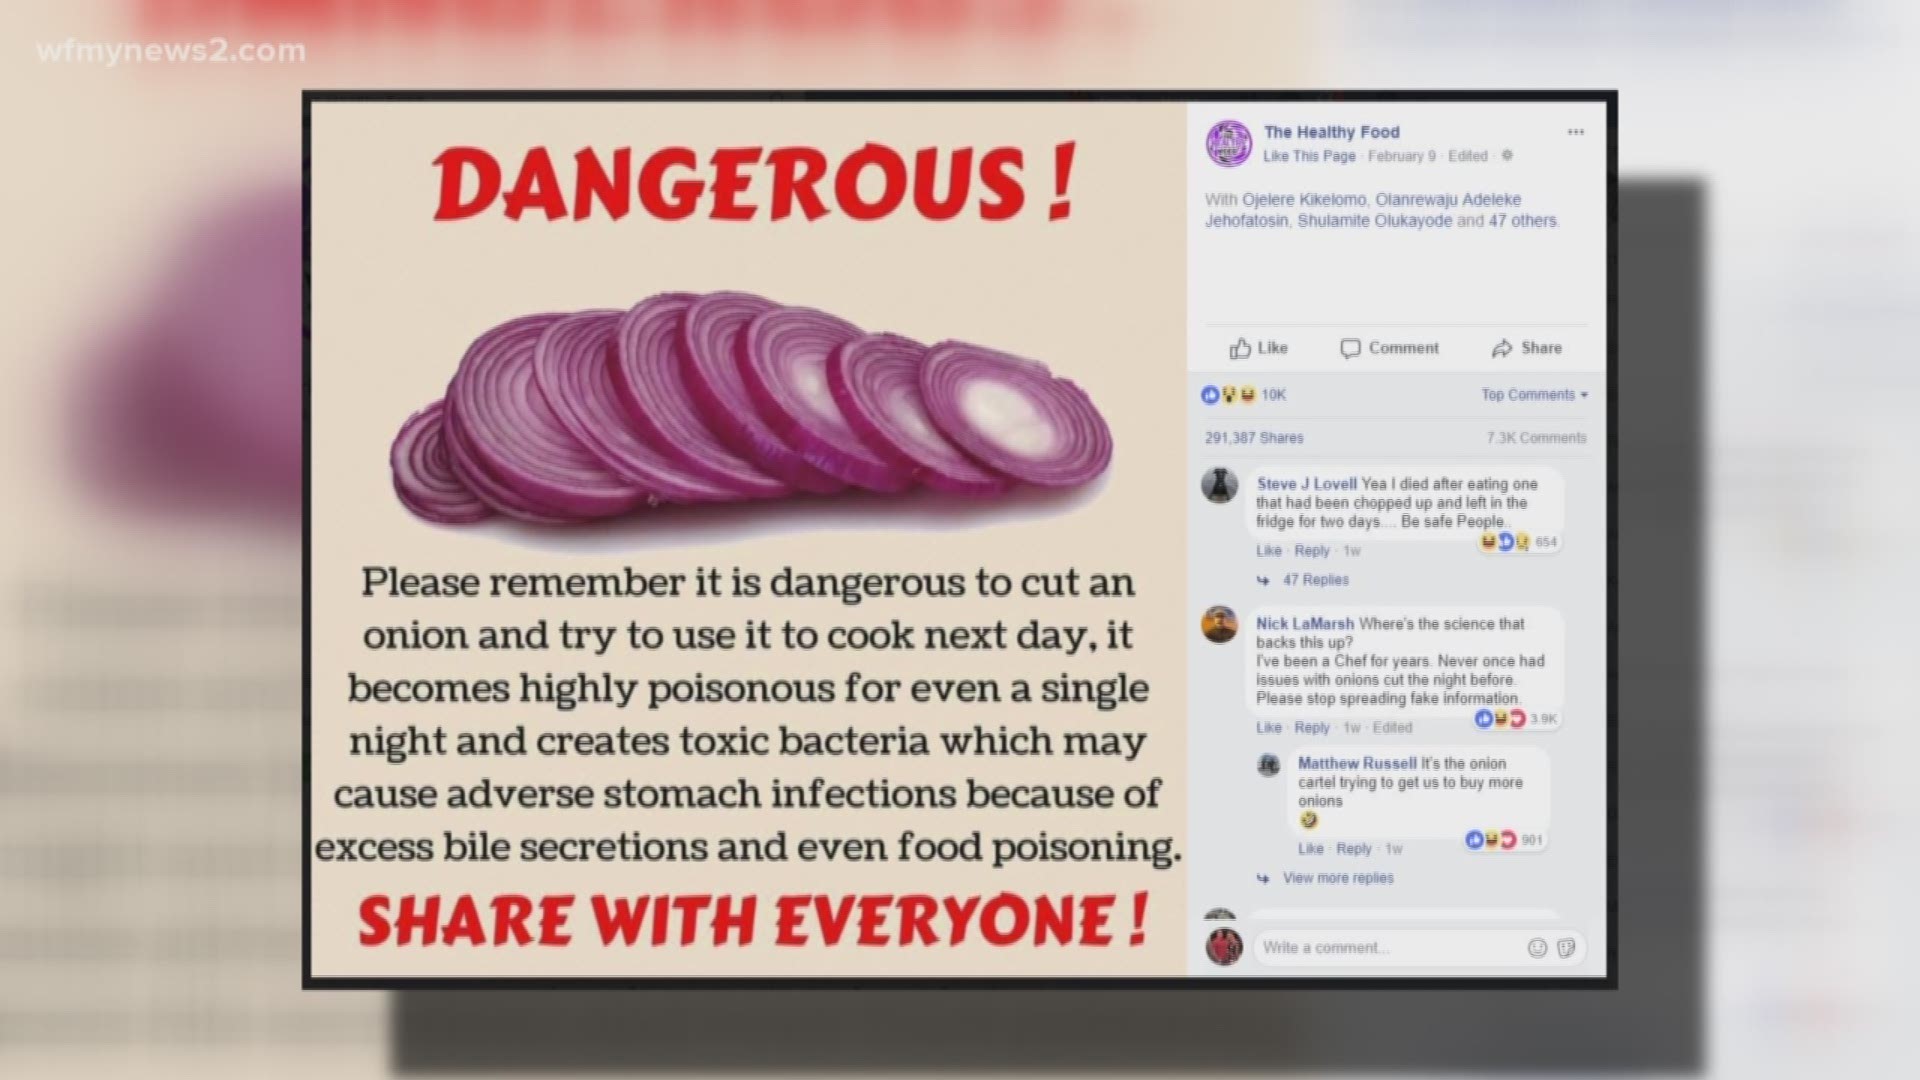 Pre-cut onions are not dangerous - Full Fact